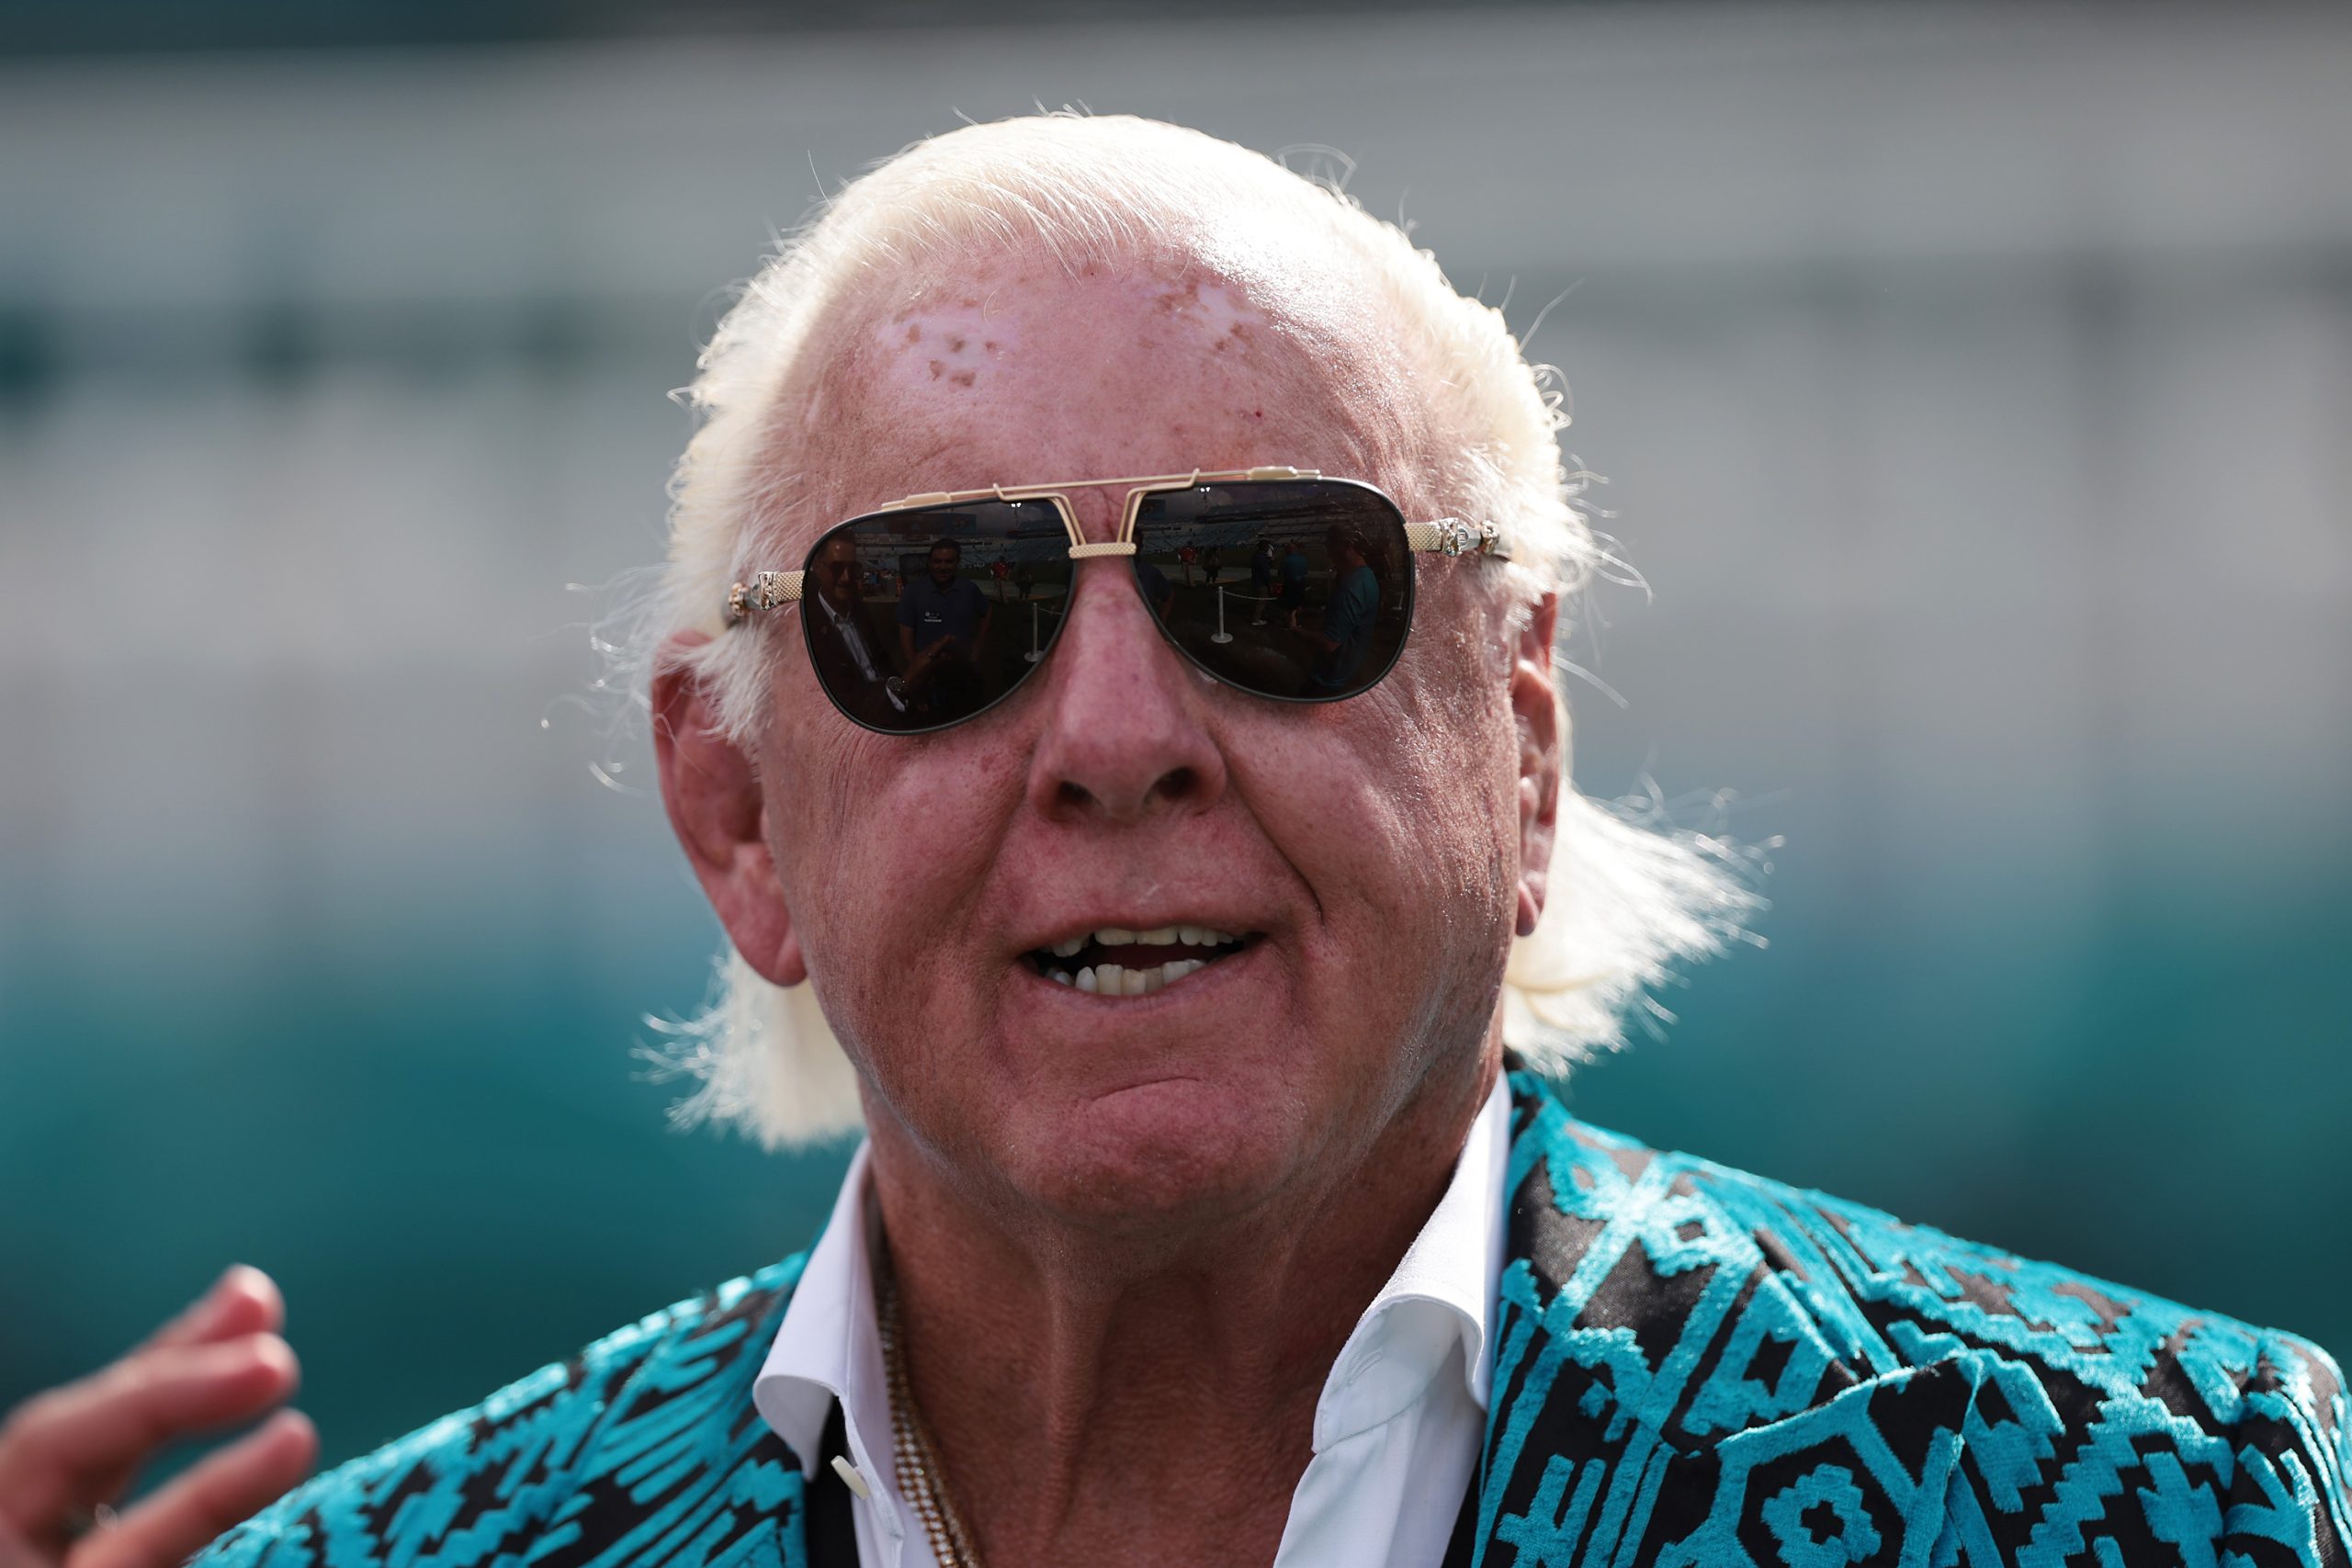 Ric Flair Details His 13 Days on Life Support to Mike Tyson